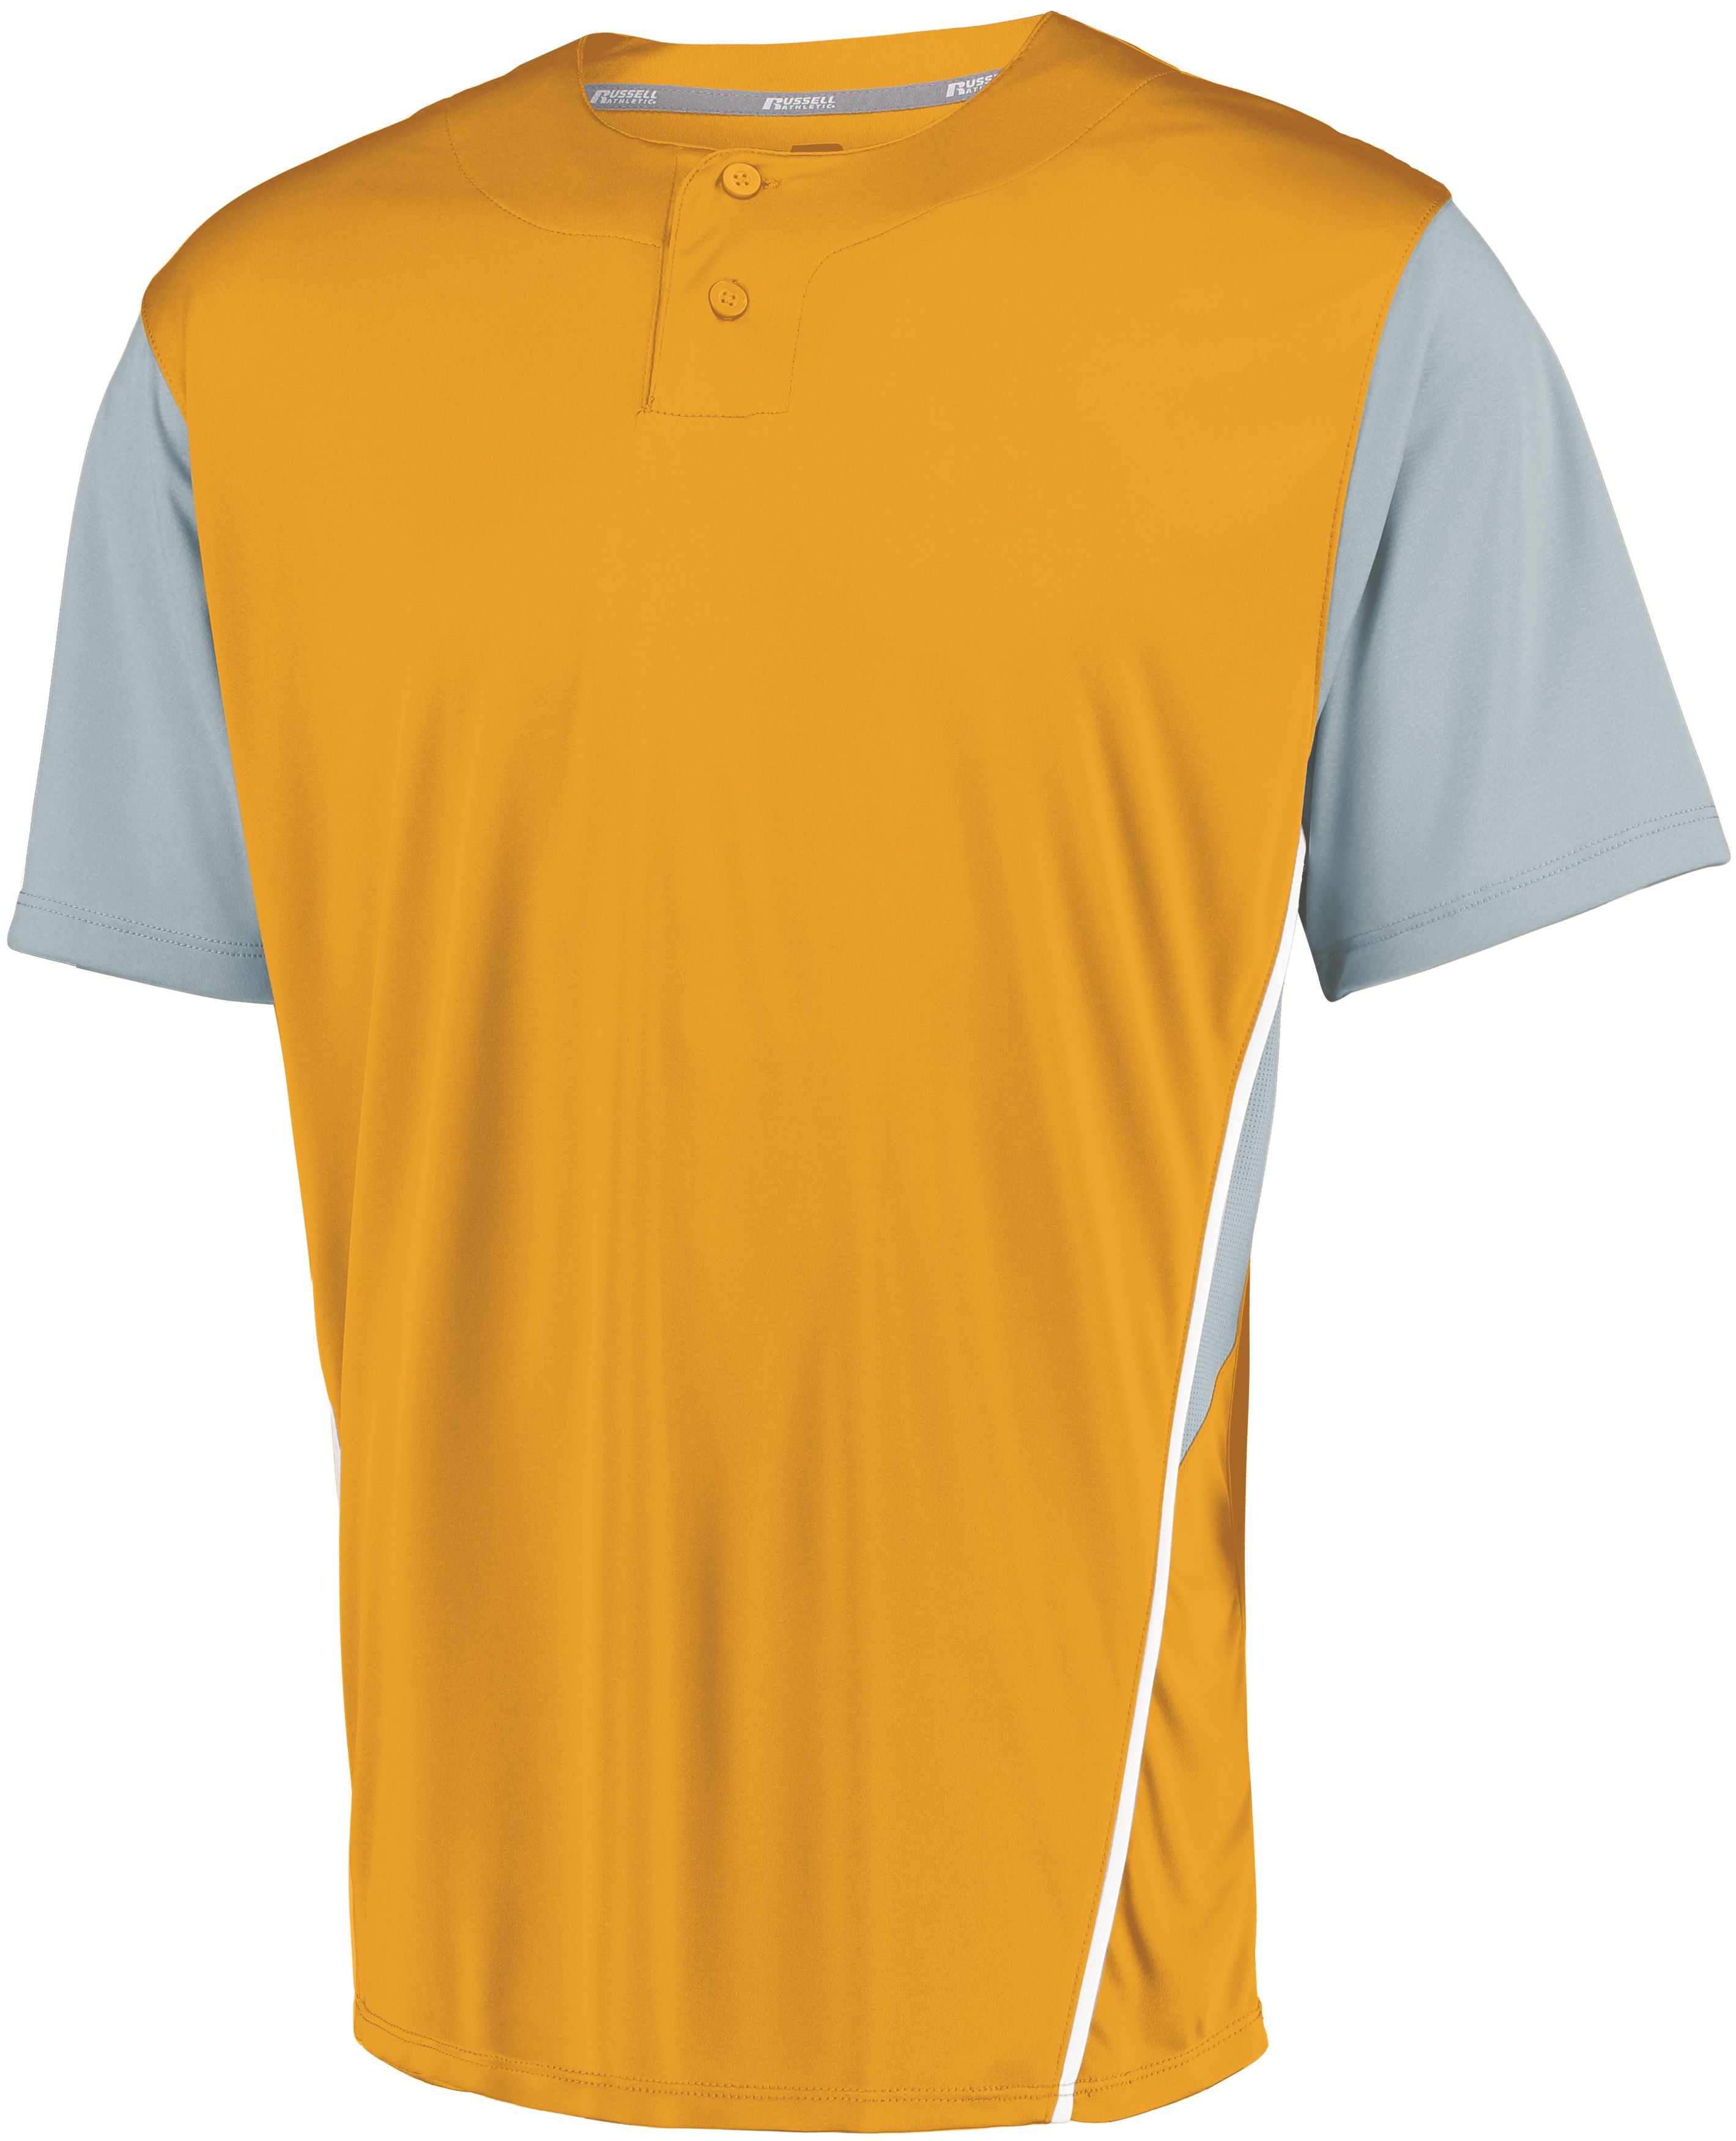 Russell Athletic Youth Two-Button Placket Jersey in Gold/Baseball Grey  -Part of the Youth, Youth-Jersey, Baseball, Russell-Athletic-Products, Shirts, All-Sports, All-Sports-1 product lines at KanaleyCreations.com